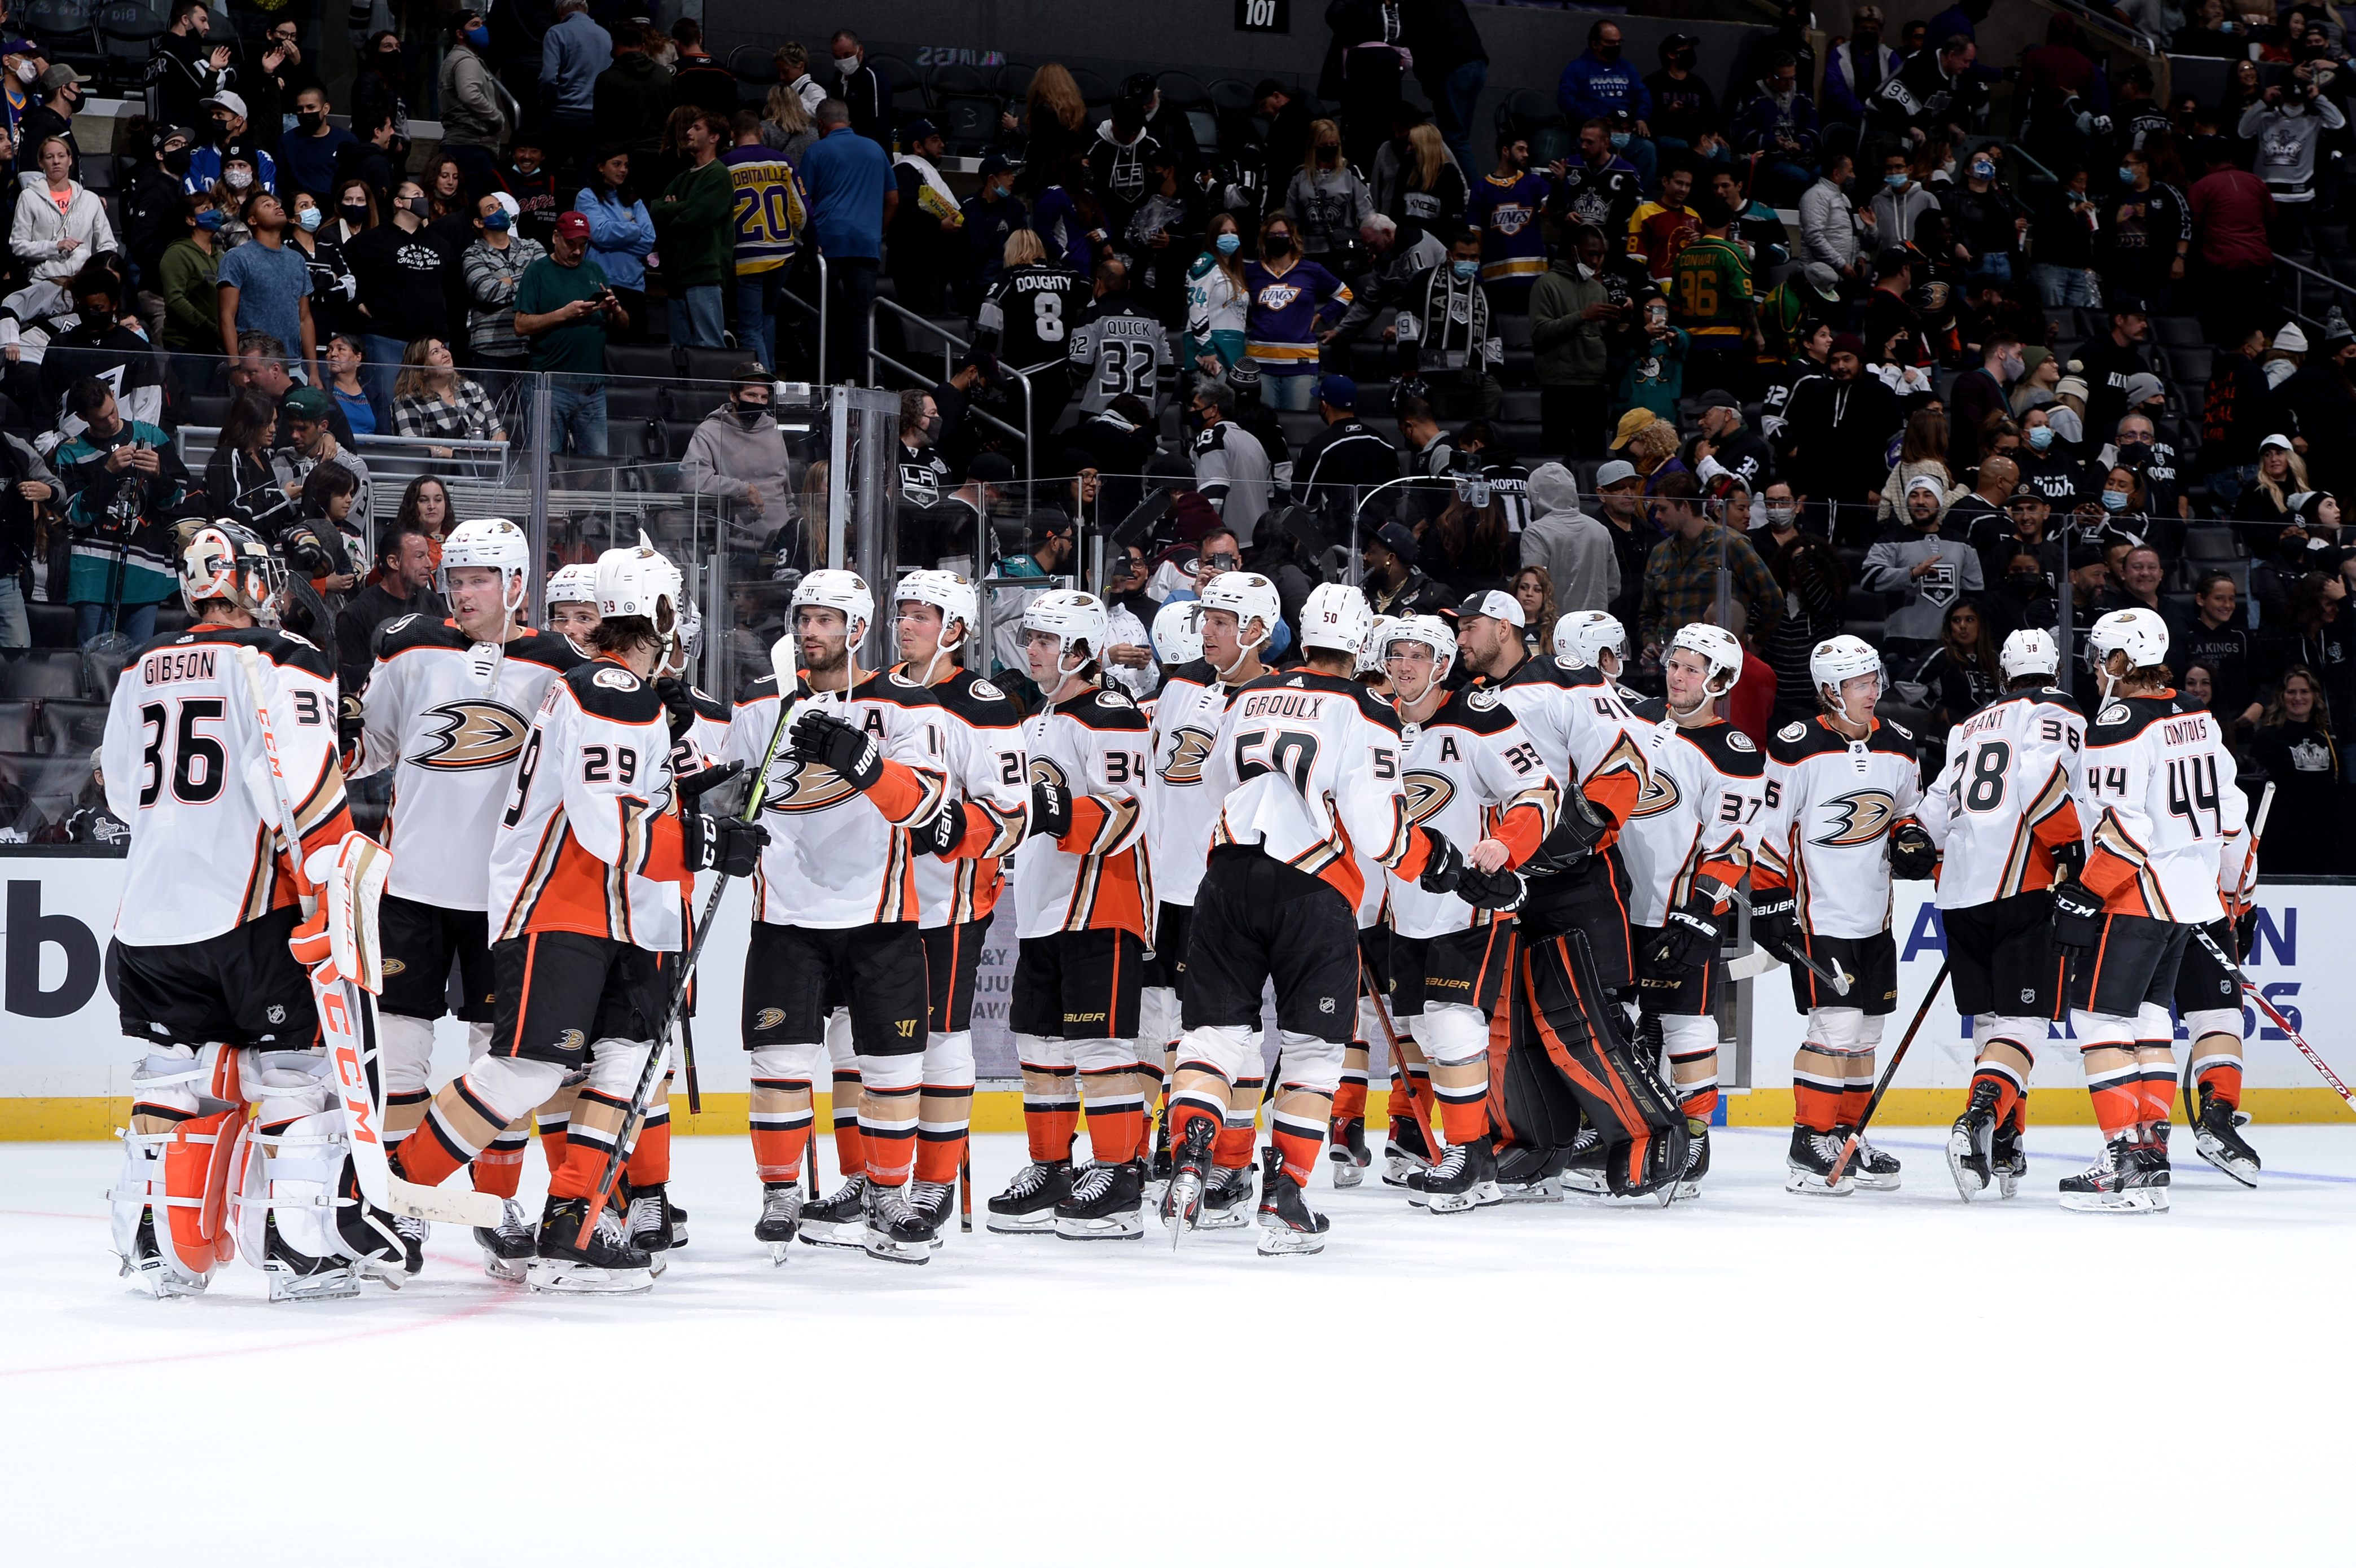 Anaheim Ducks celebrate their win during overtime against the Los Angeles Kings at STAPLES Center on October 9, 2021 in Los Angeles, California.